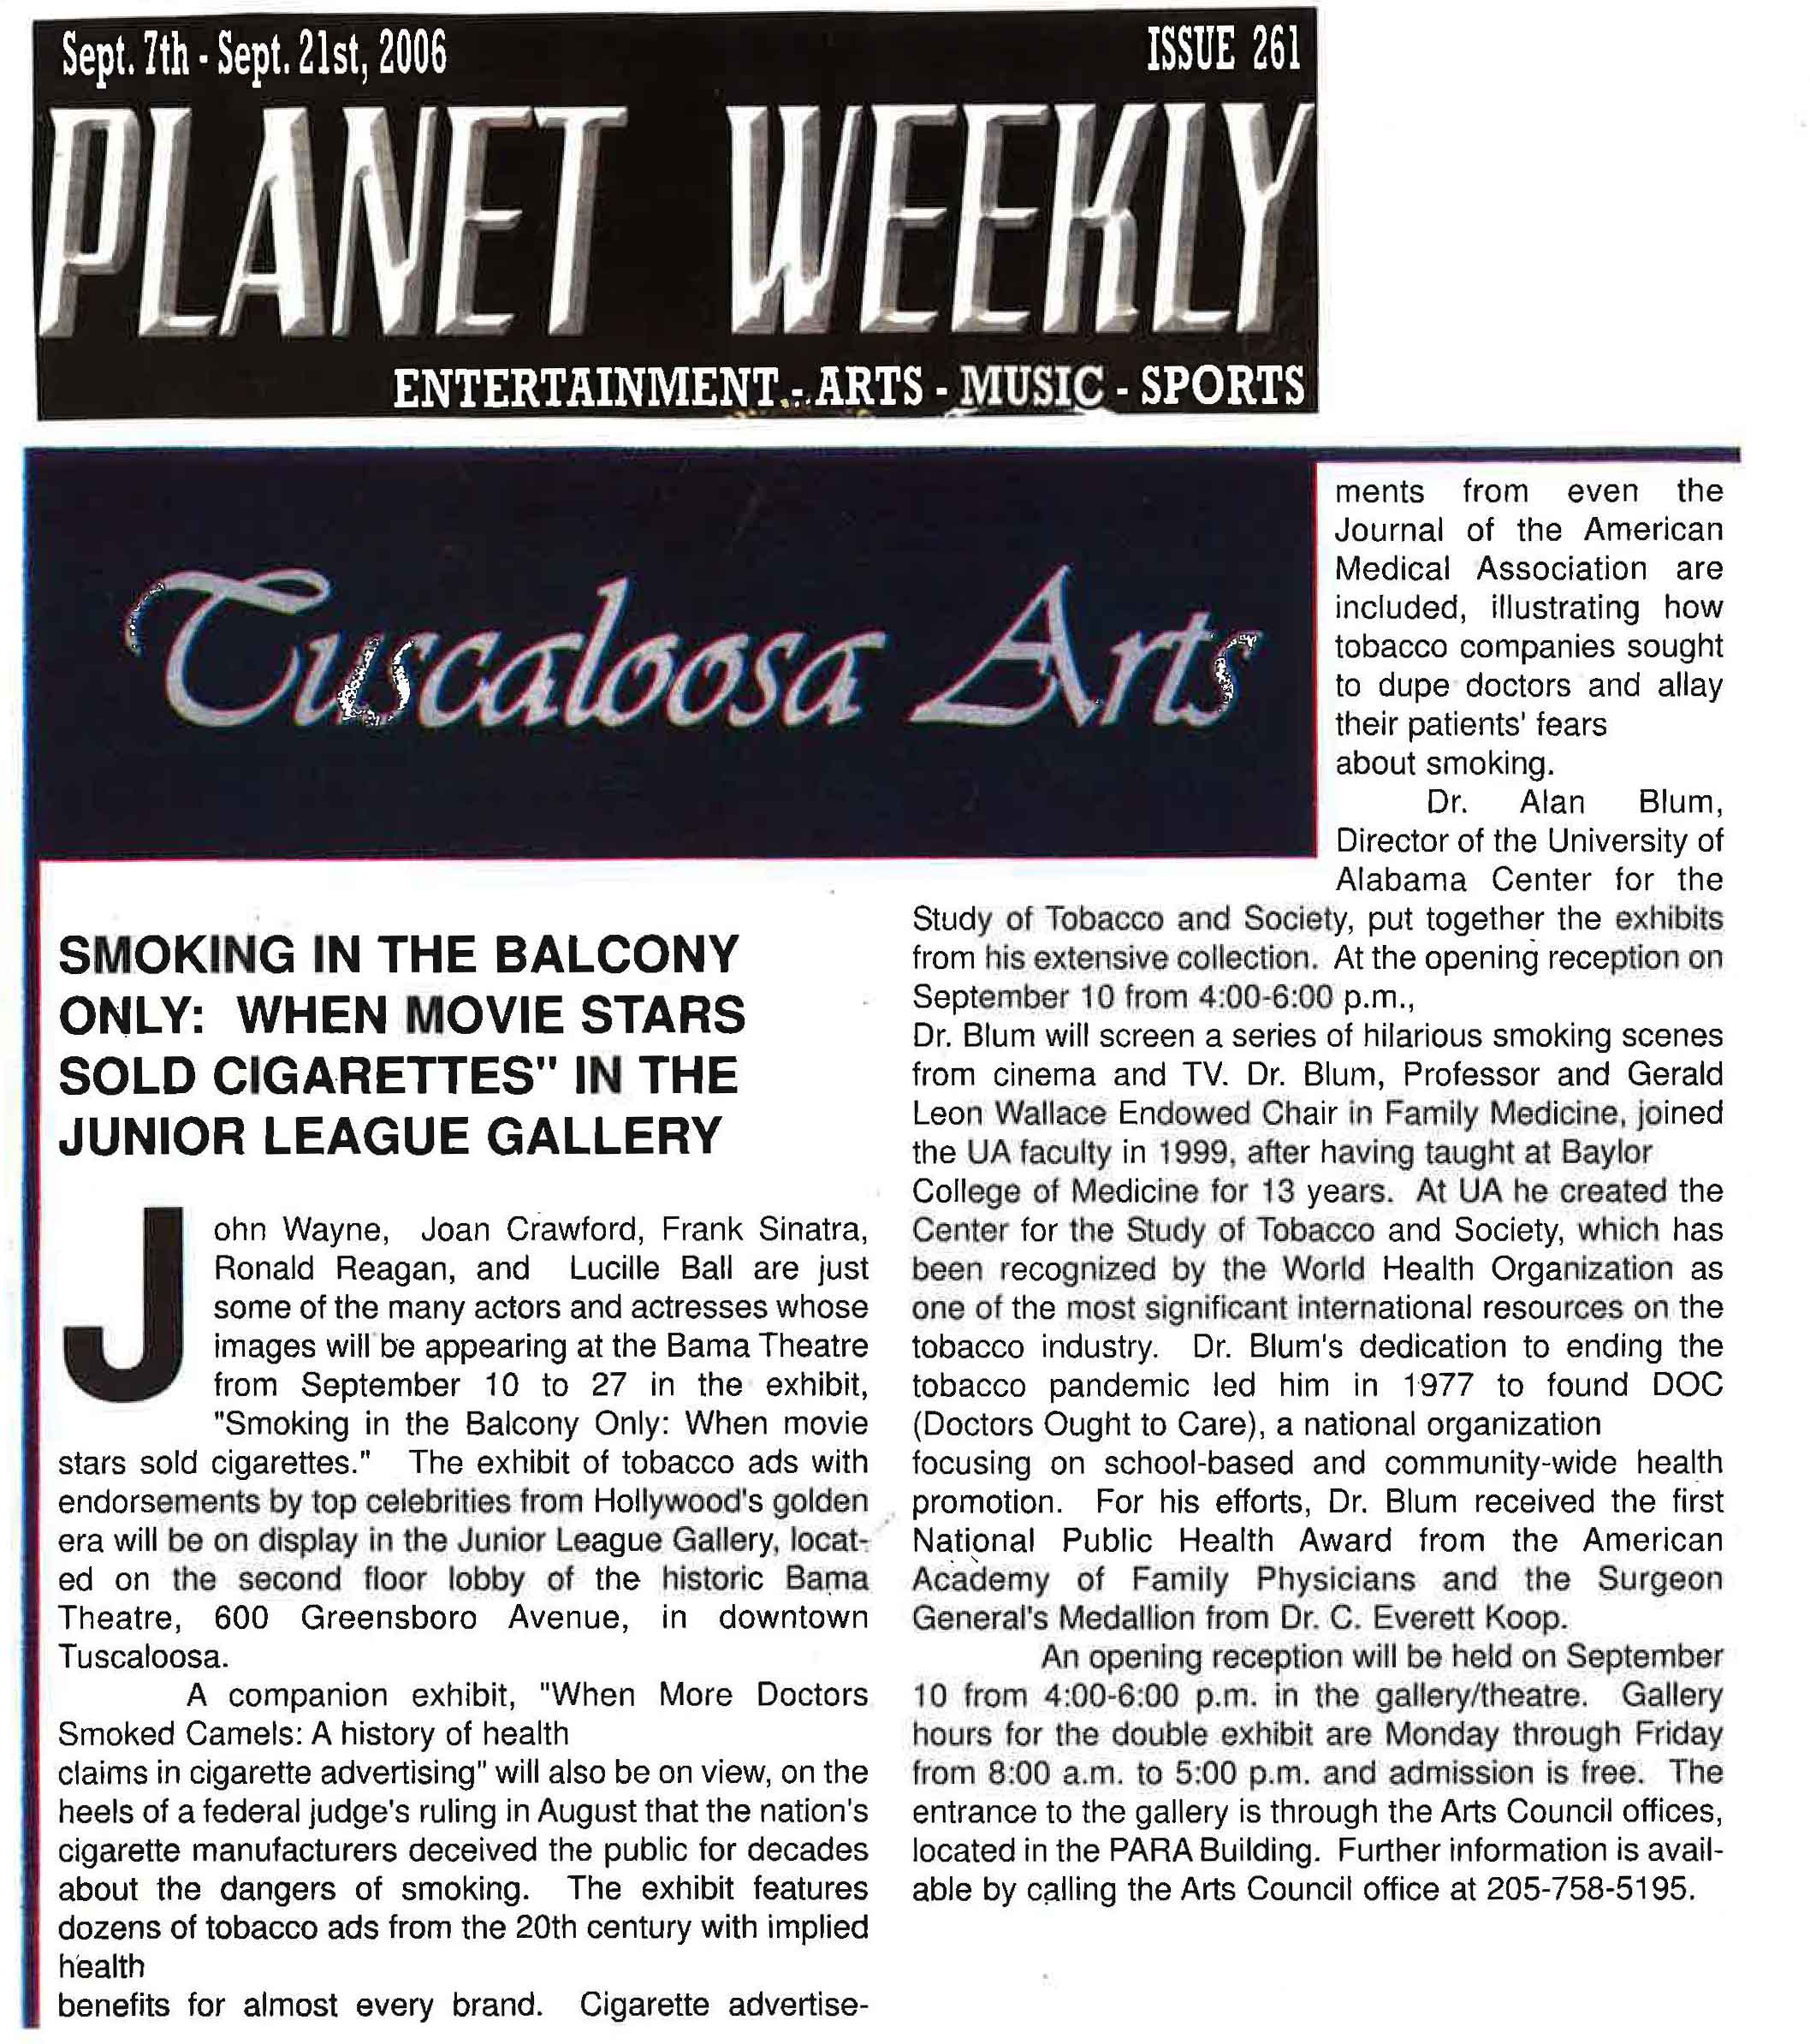 2006 Planet Weekly Tuscaloosa Arts Smoking in the Blacony Only in the junior league gallery